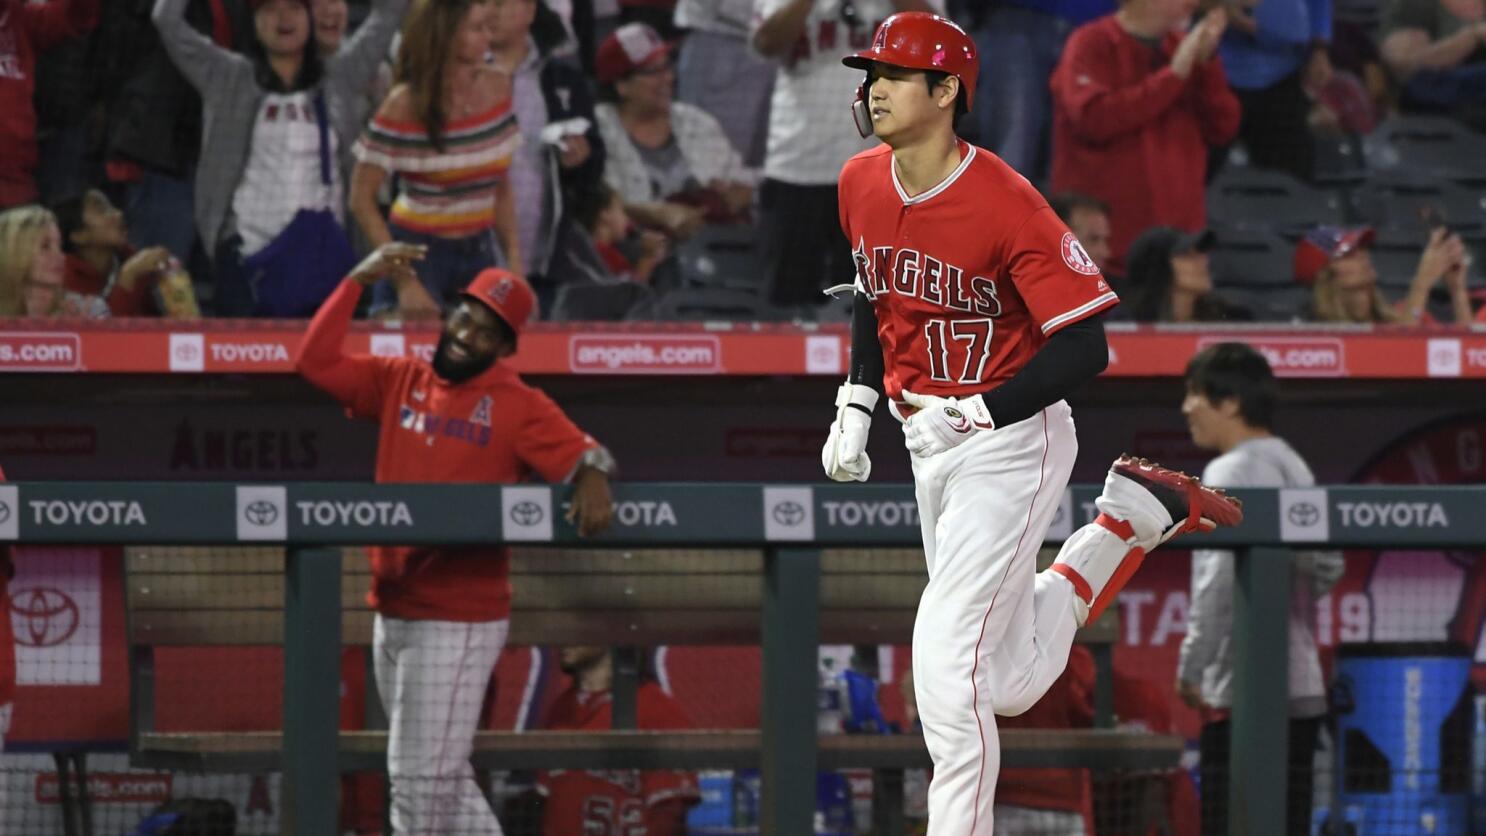 Shohei Ohtani's homer helps lift Angels past Mariners - Los Angeles Times